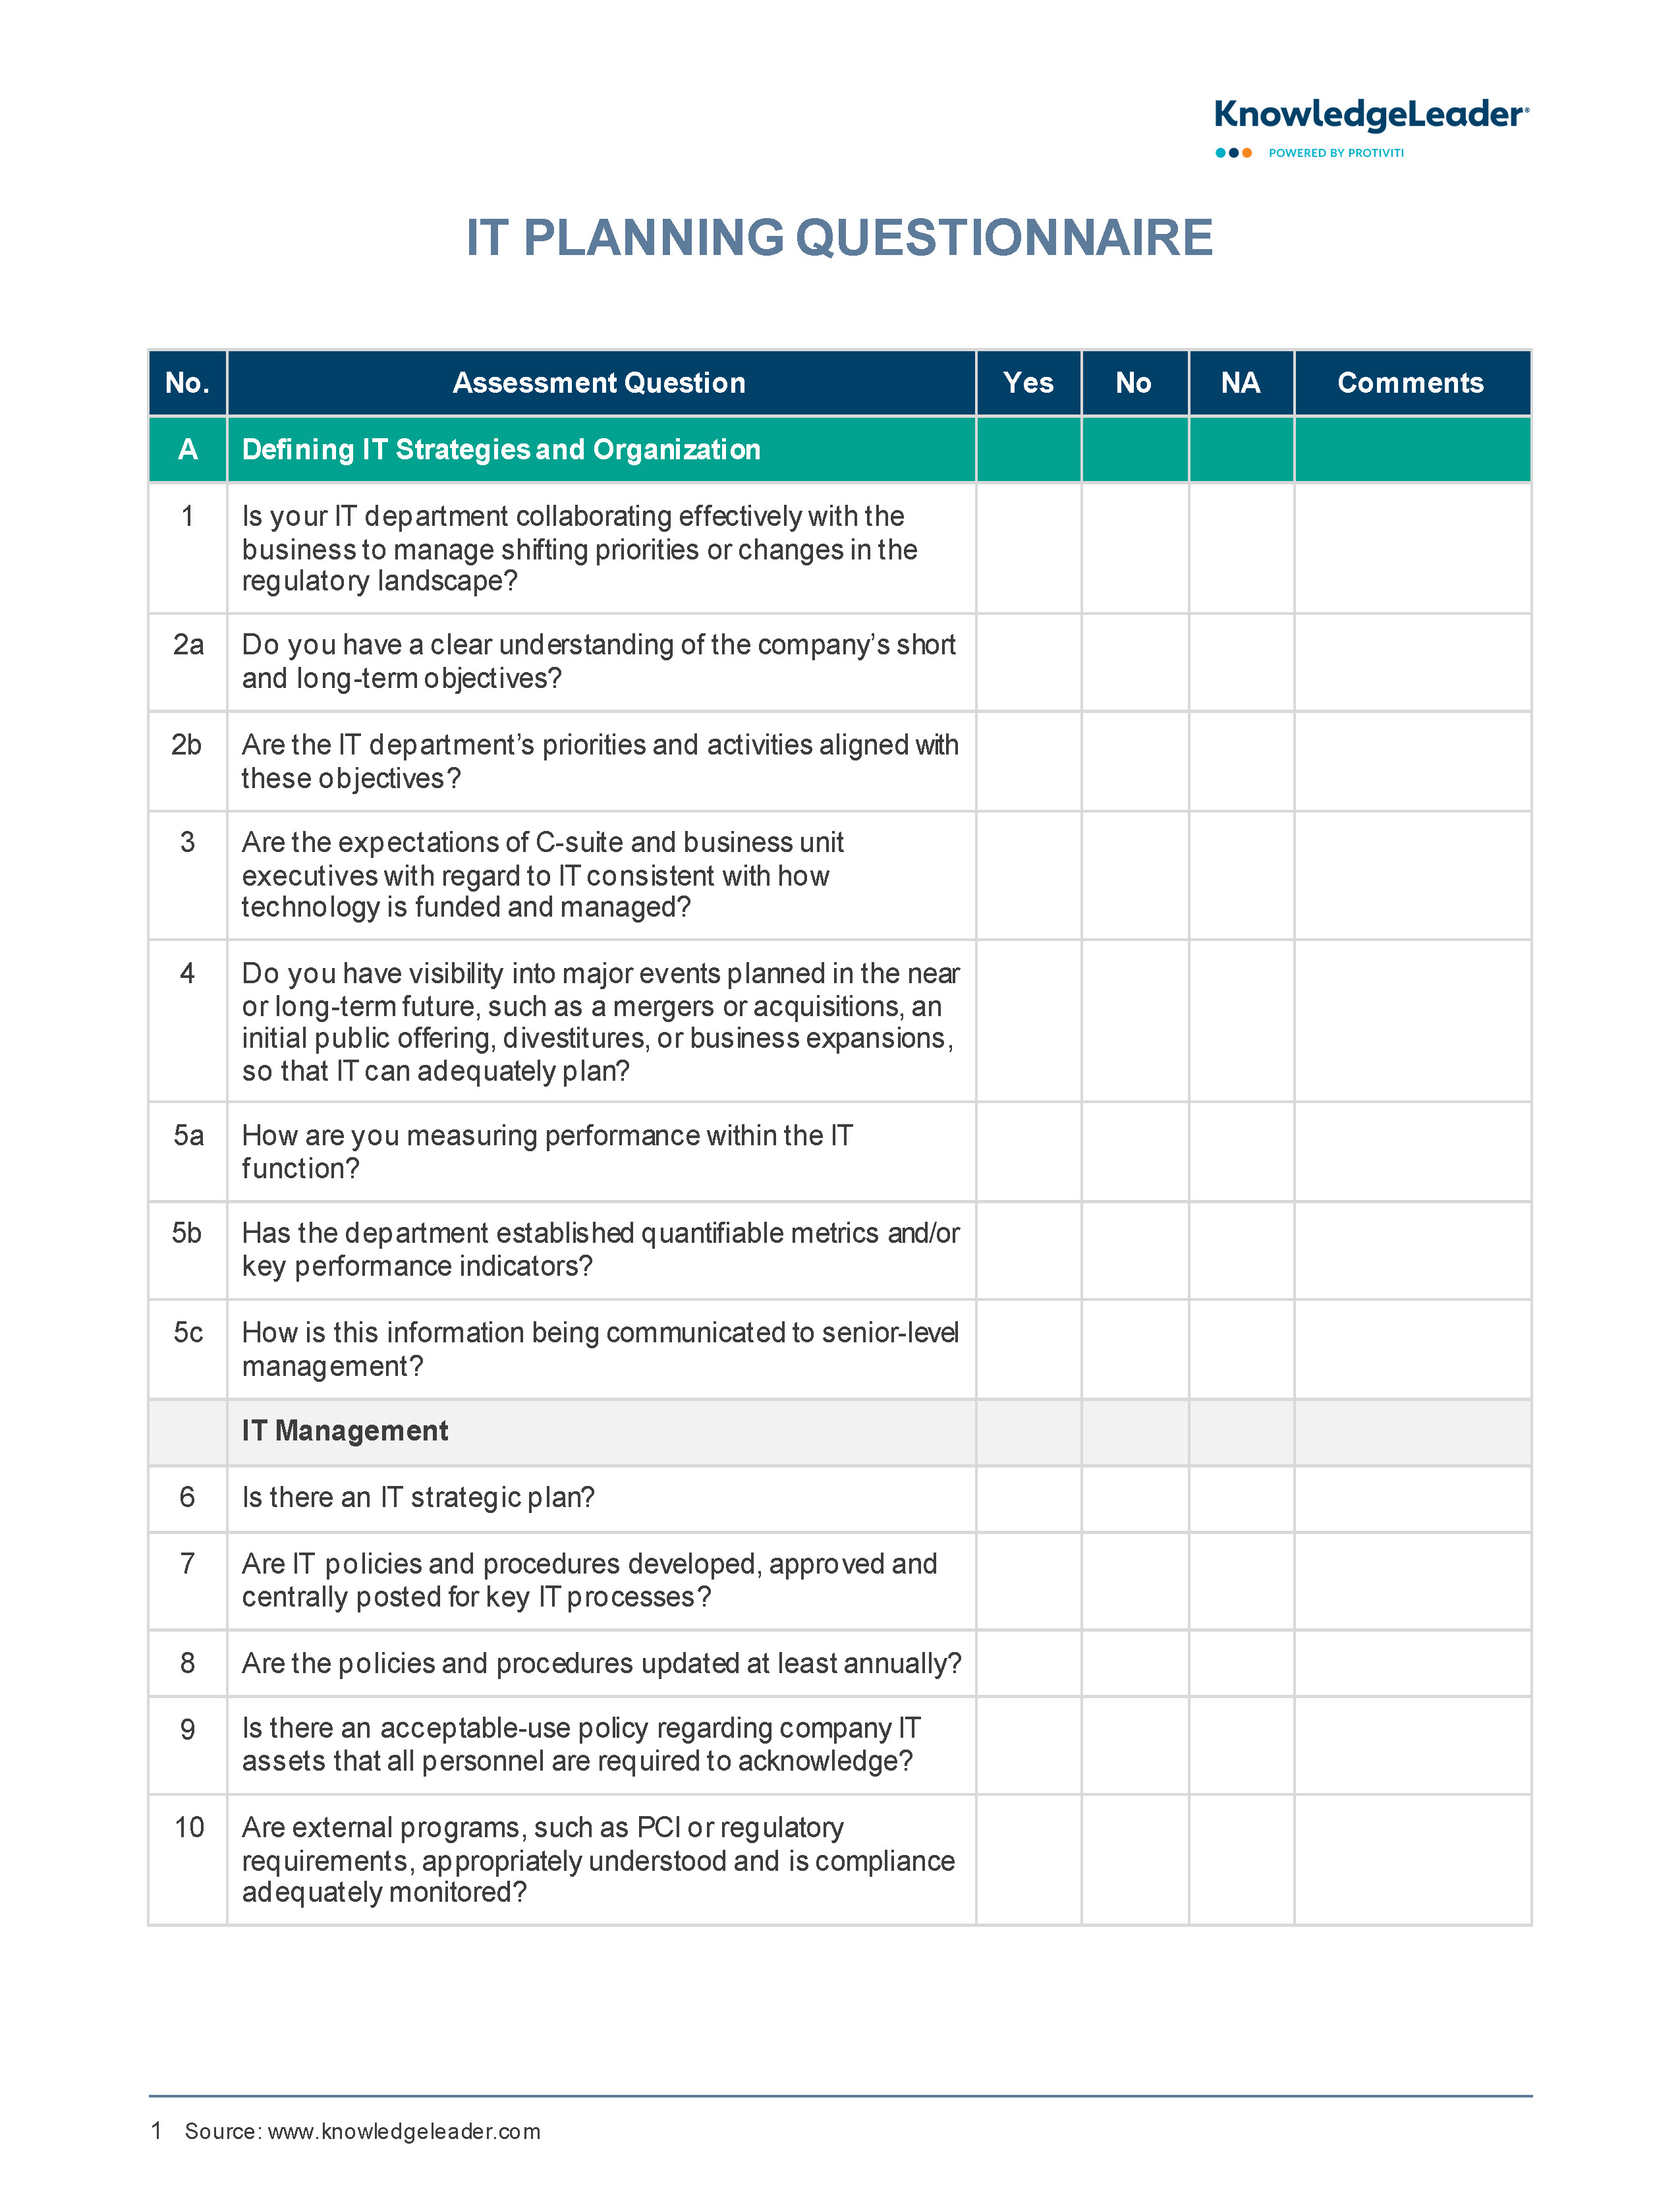 Screenshot of the first page of IT Planning Questionnaire